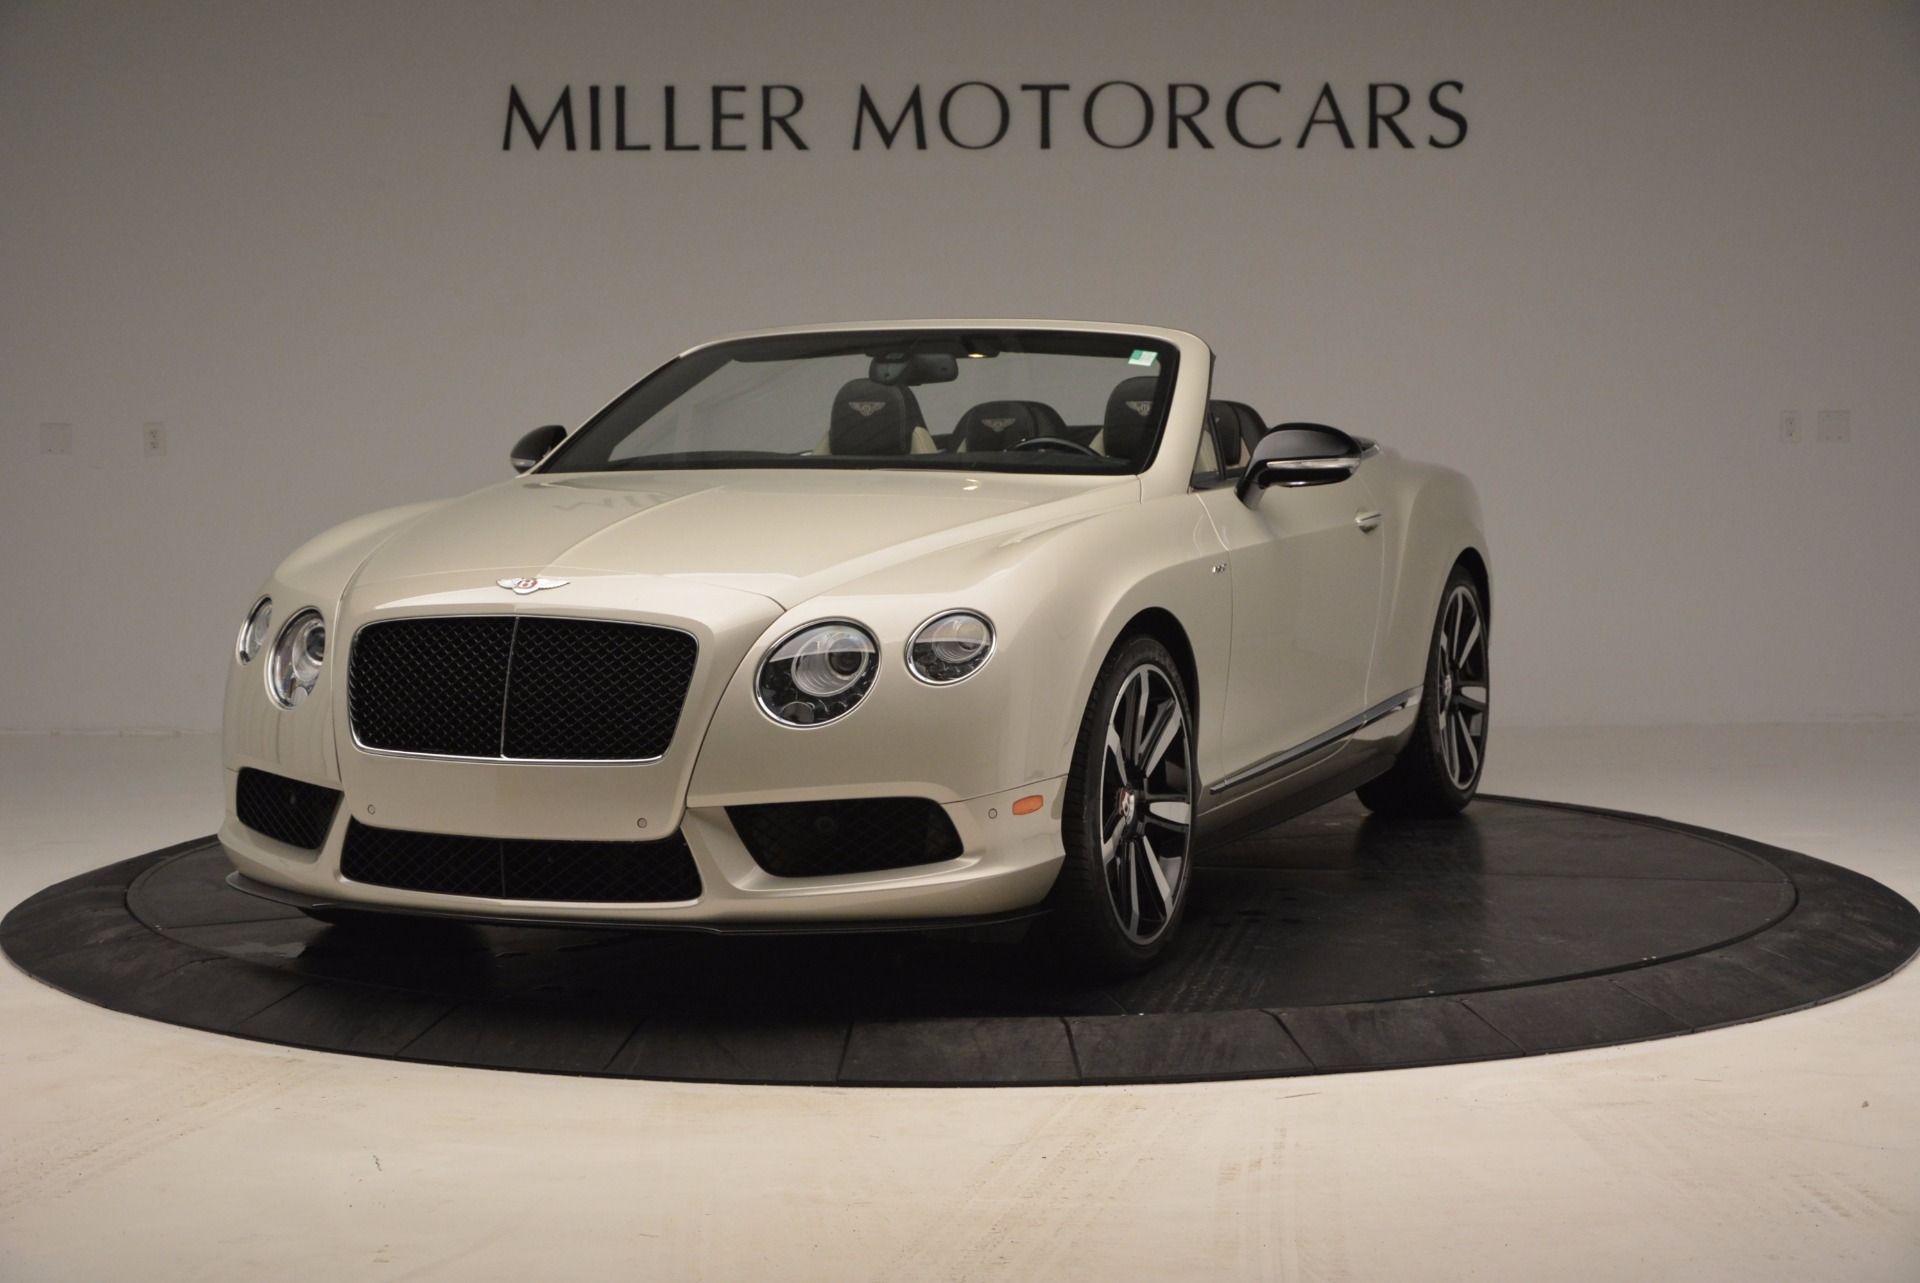 Used 2014 Bentley Continental GT V8 S for sale Sold at McLaren Greenwich in Greenwich CT 06830 1